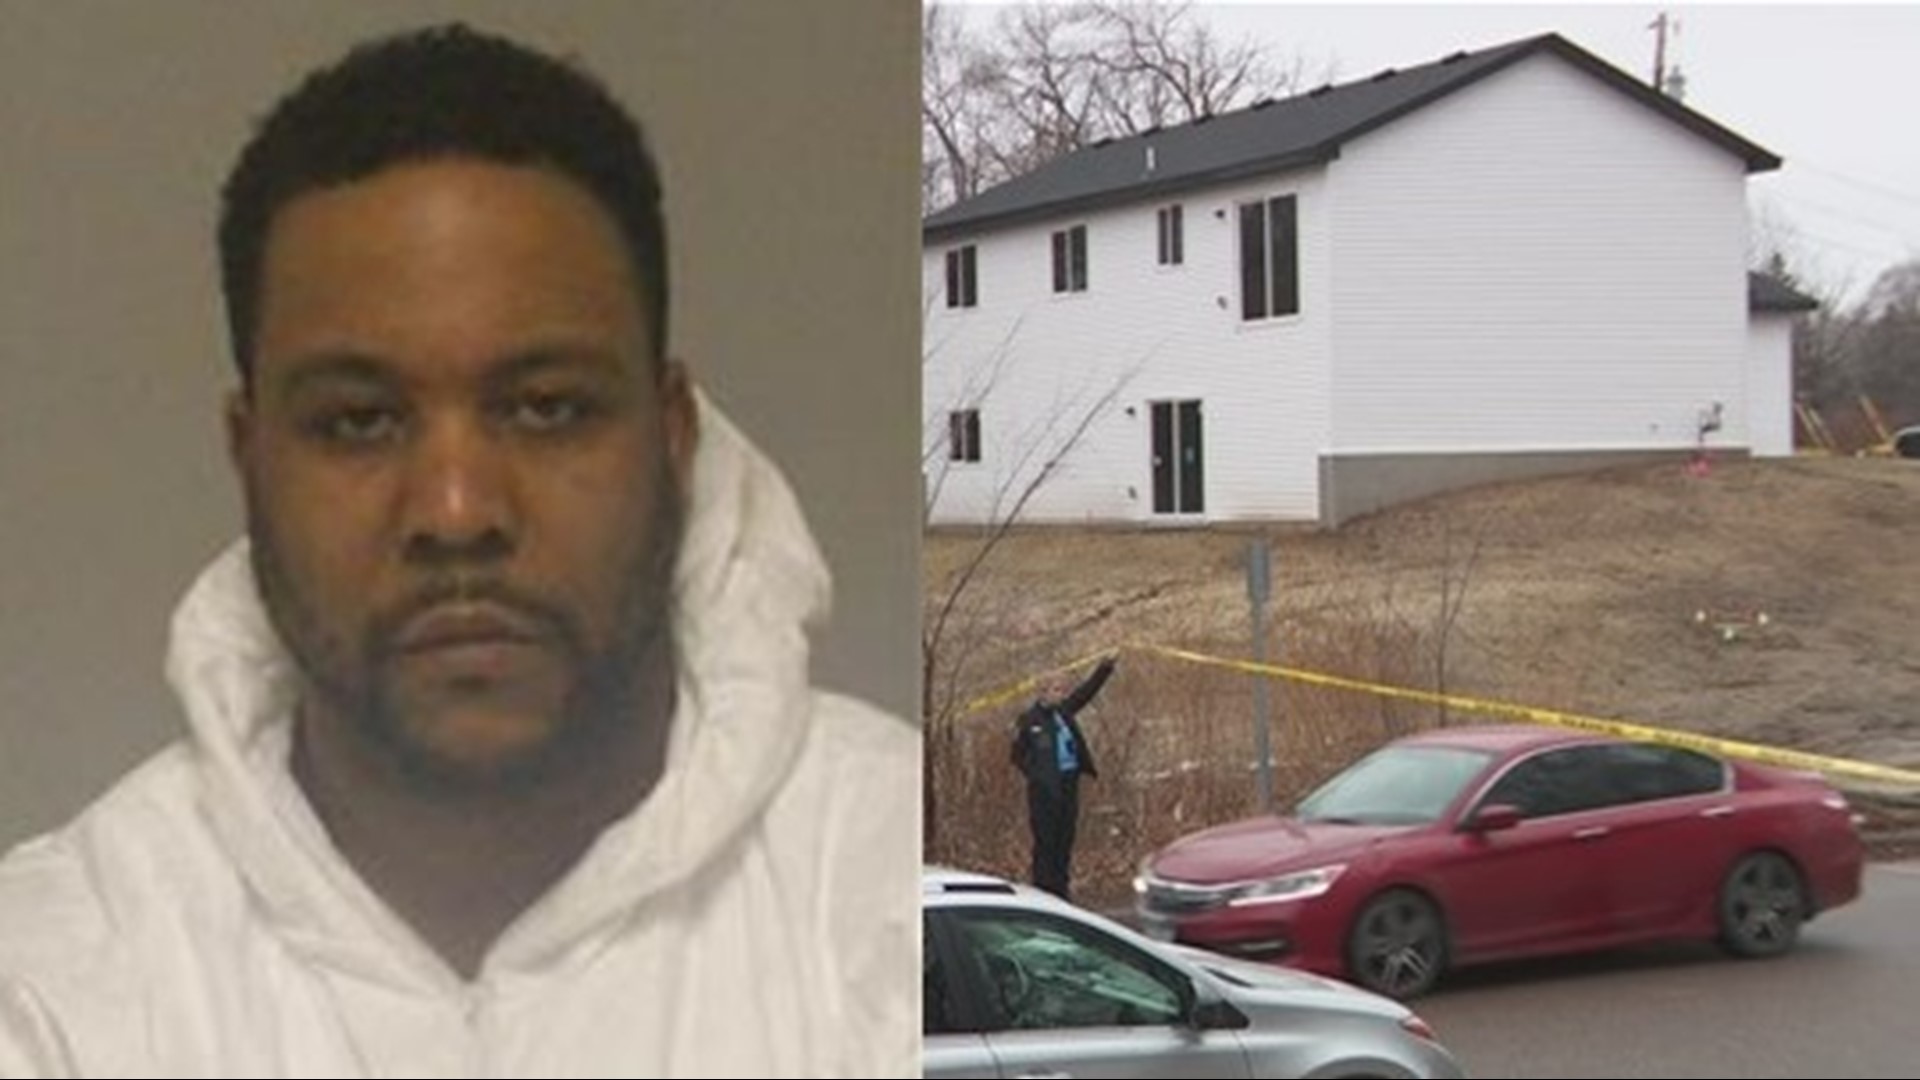 A criminal complaint says 37-year-old Alonzo Pierre Mingo entered a home on the 200 block of 94th Ave. NW and fatally shot a woman, her husband and son.